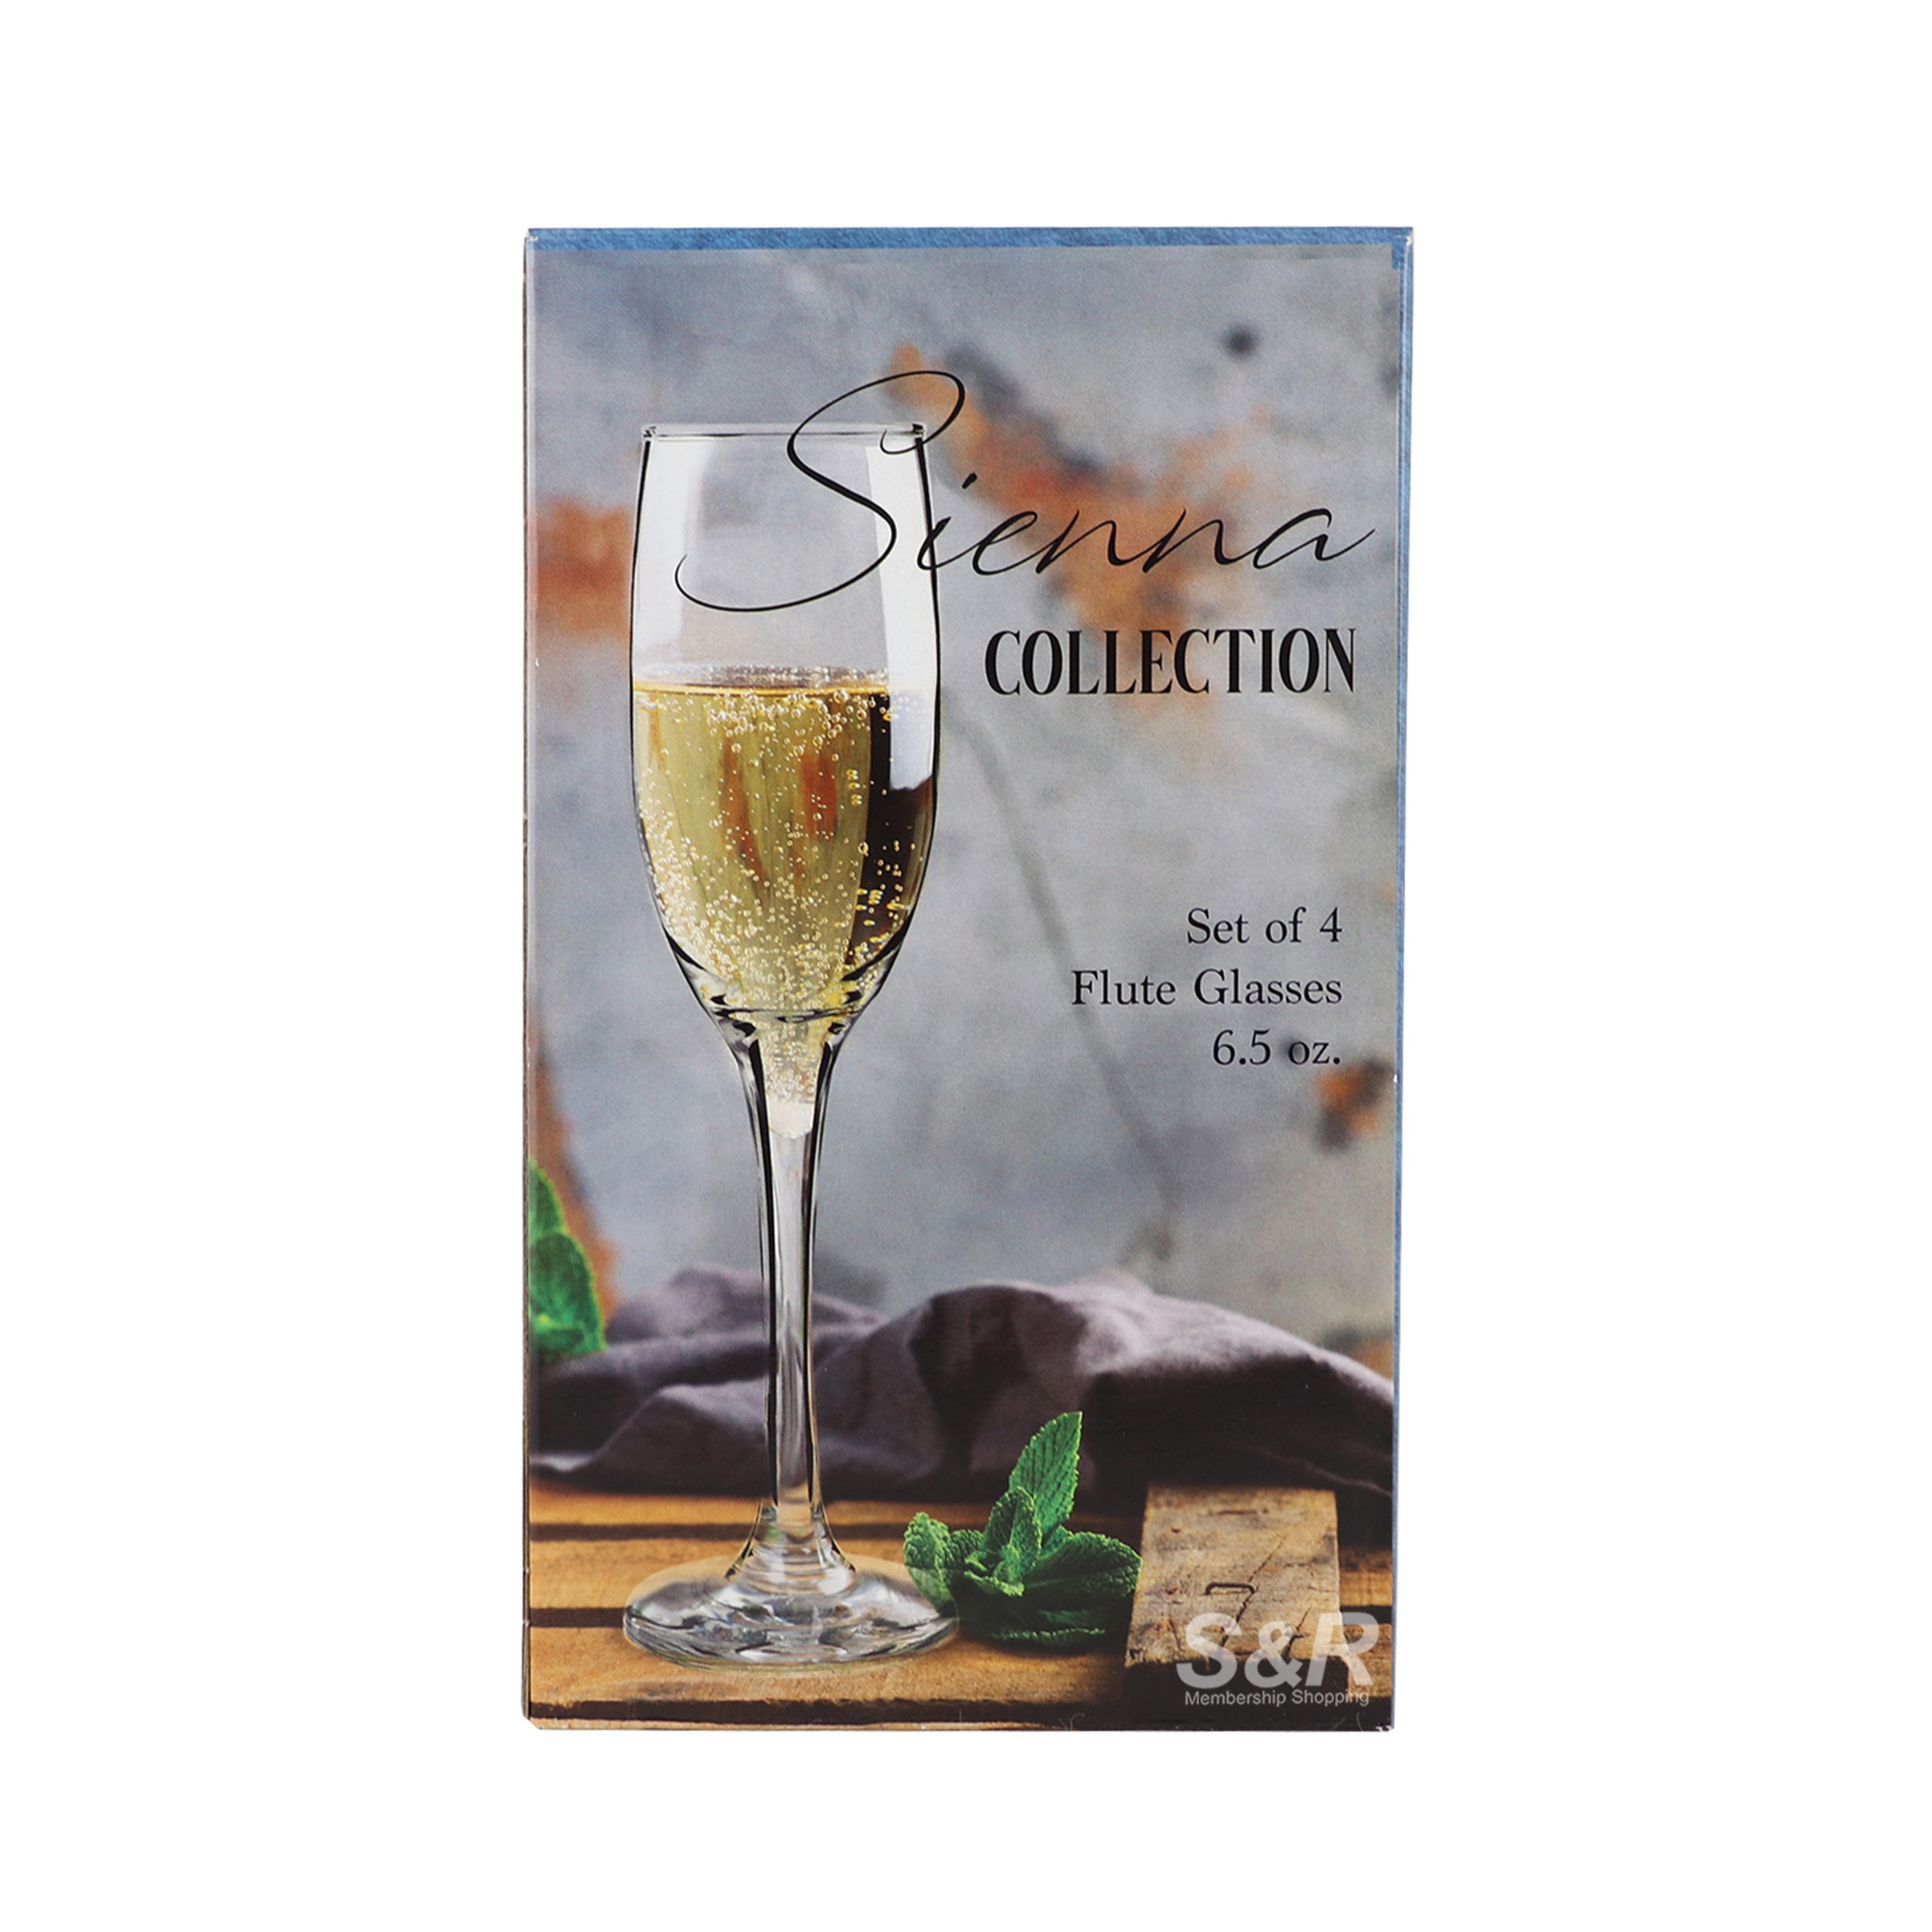 Sienna Collection FLute Glasses (184g x 4pcs)